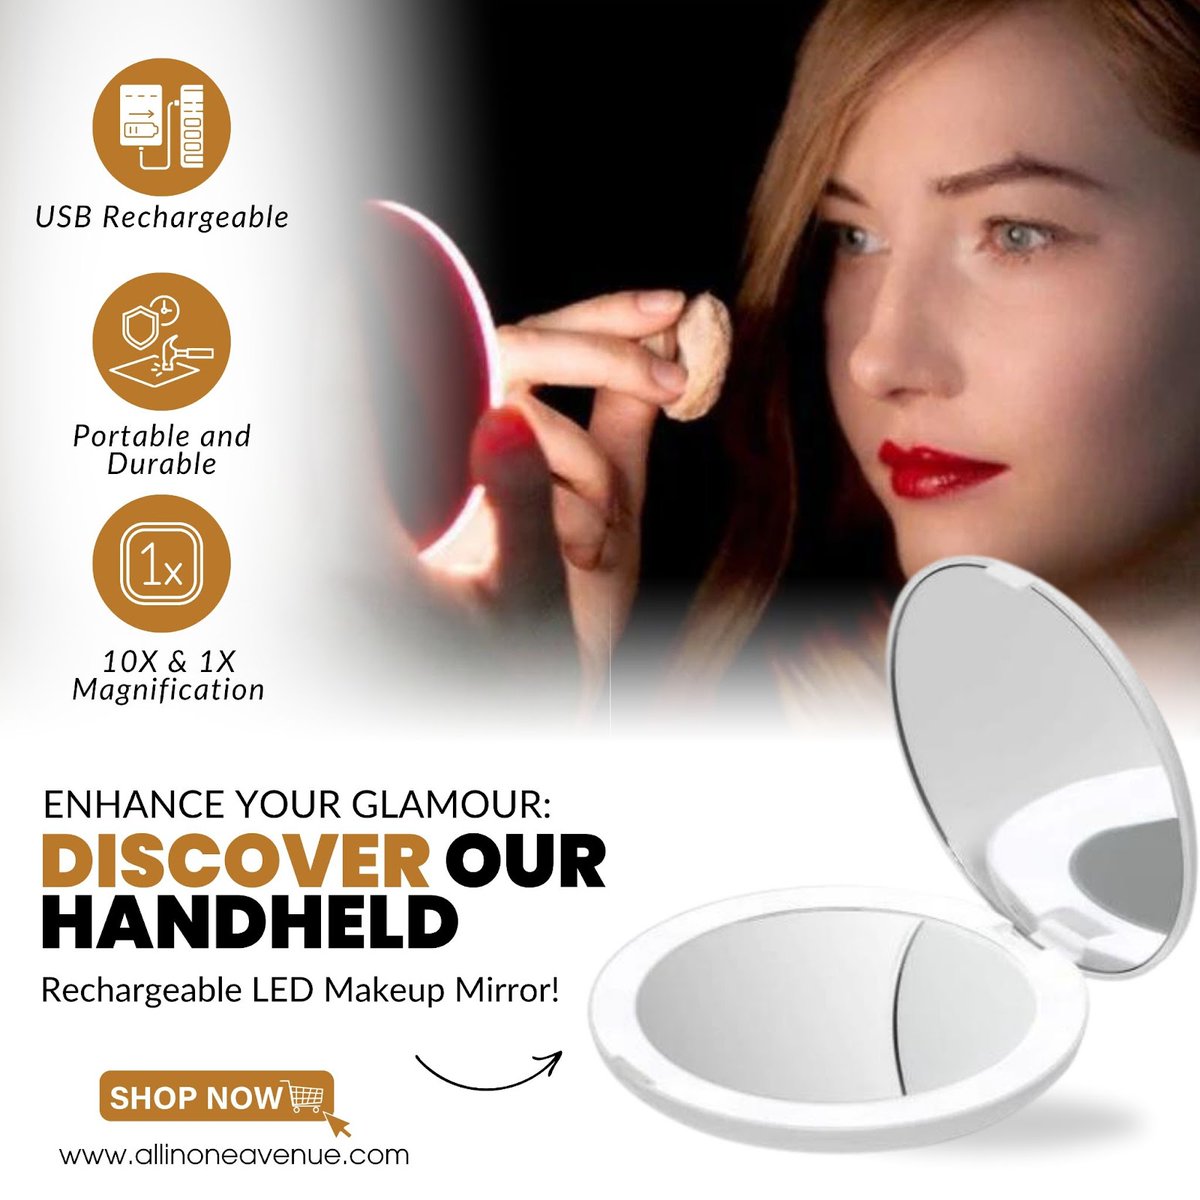 Illuminate your beauty routine with our Handheld Rechargeable LED Makeup Mirror!

Benefits:

Portable and Convenient: Take it anywhere for flawless makeup application on the go.
.
#makeupmirror #ledmirror #beautyessentials #portablemirror #makeuproutine #beautytools